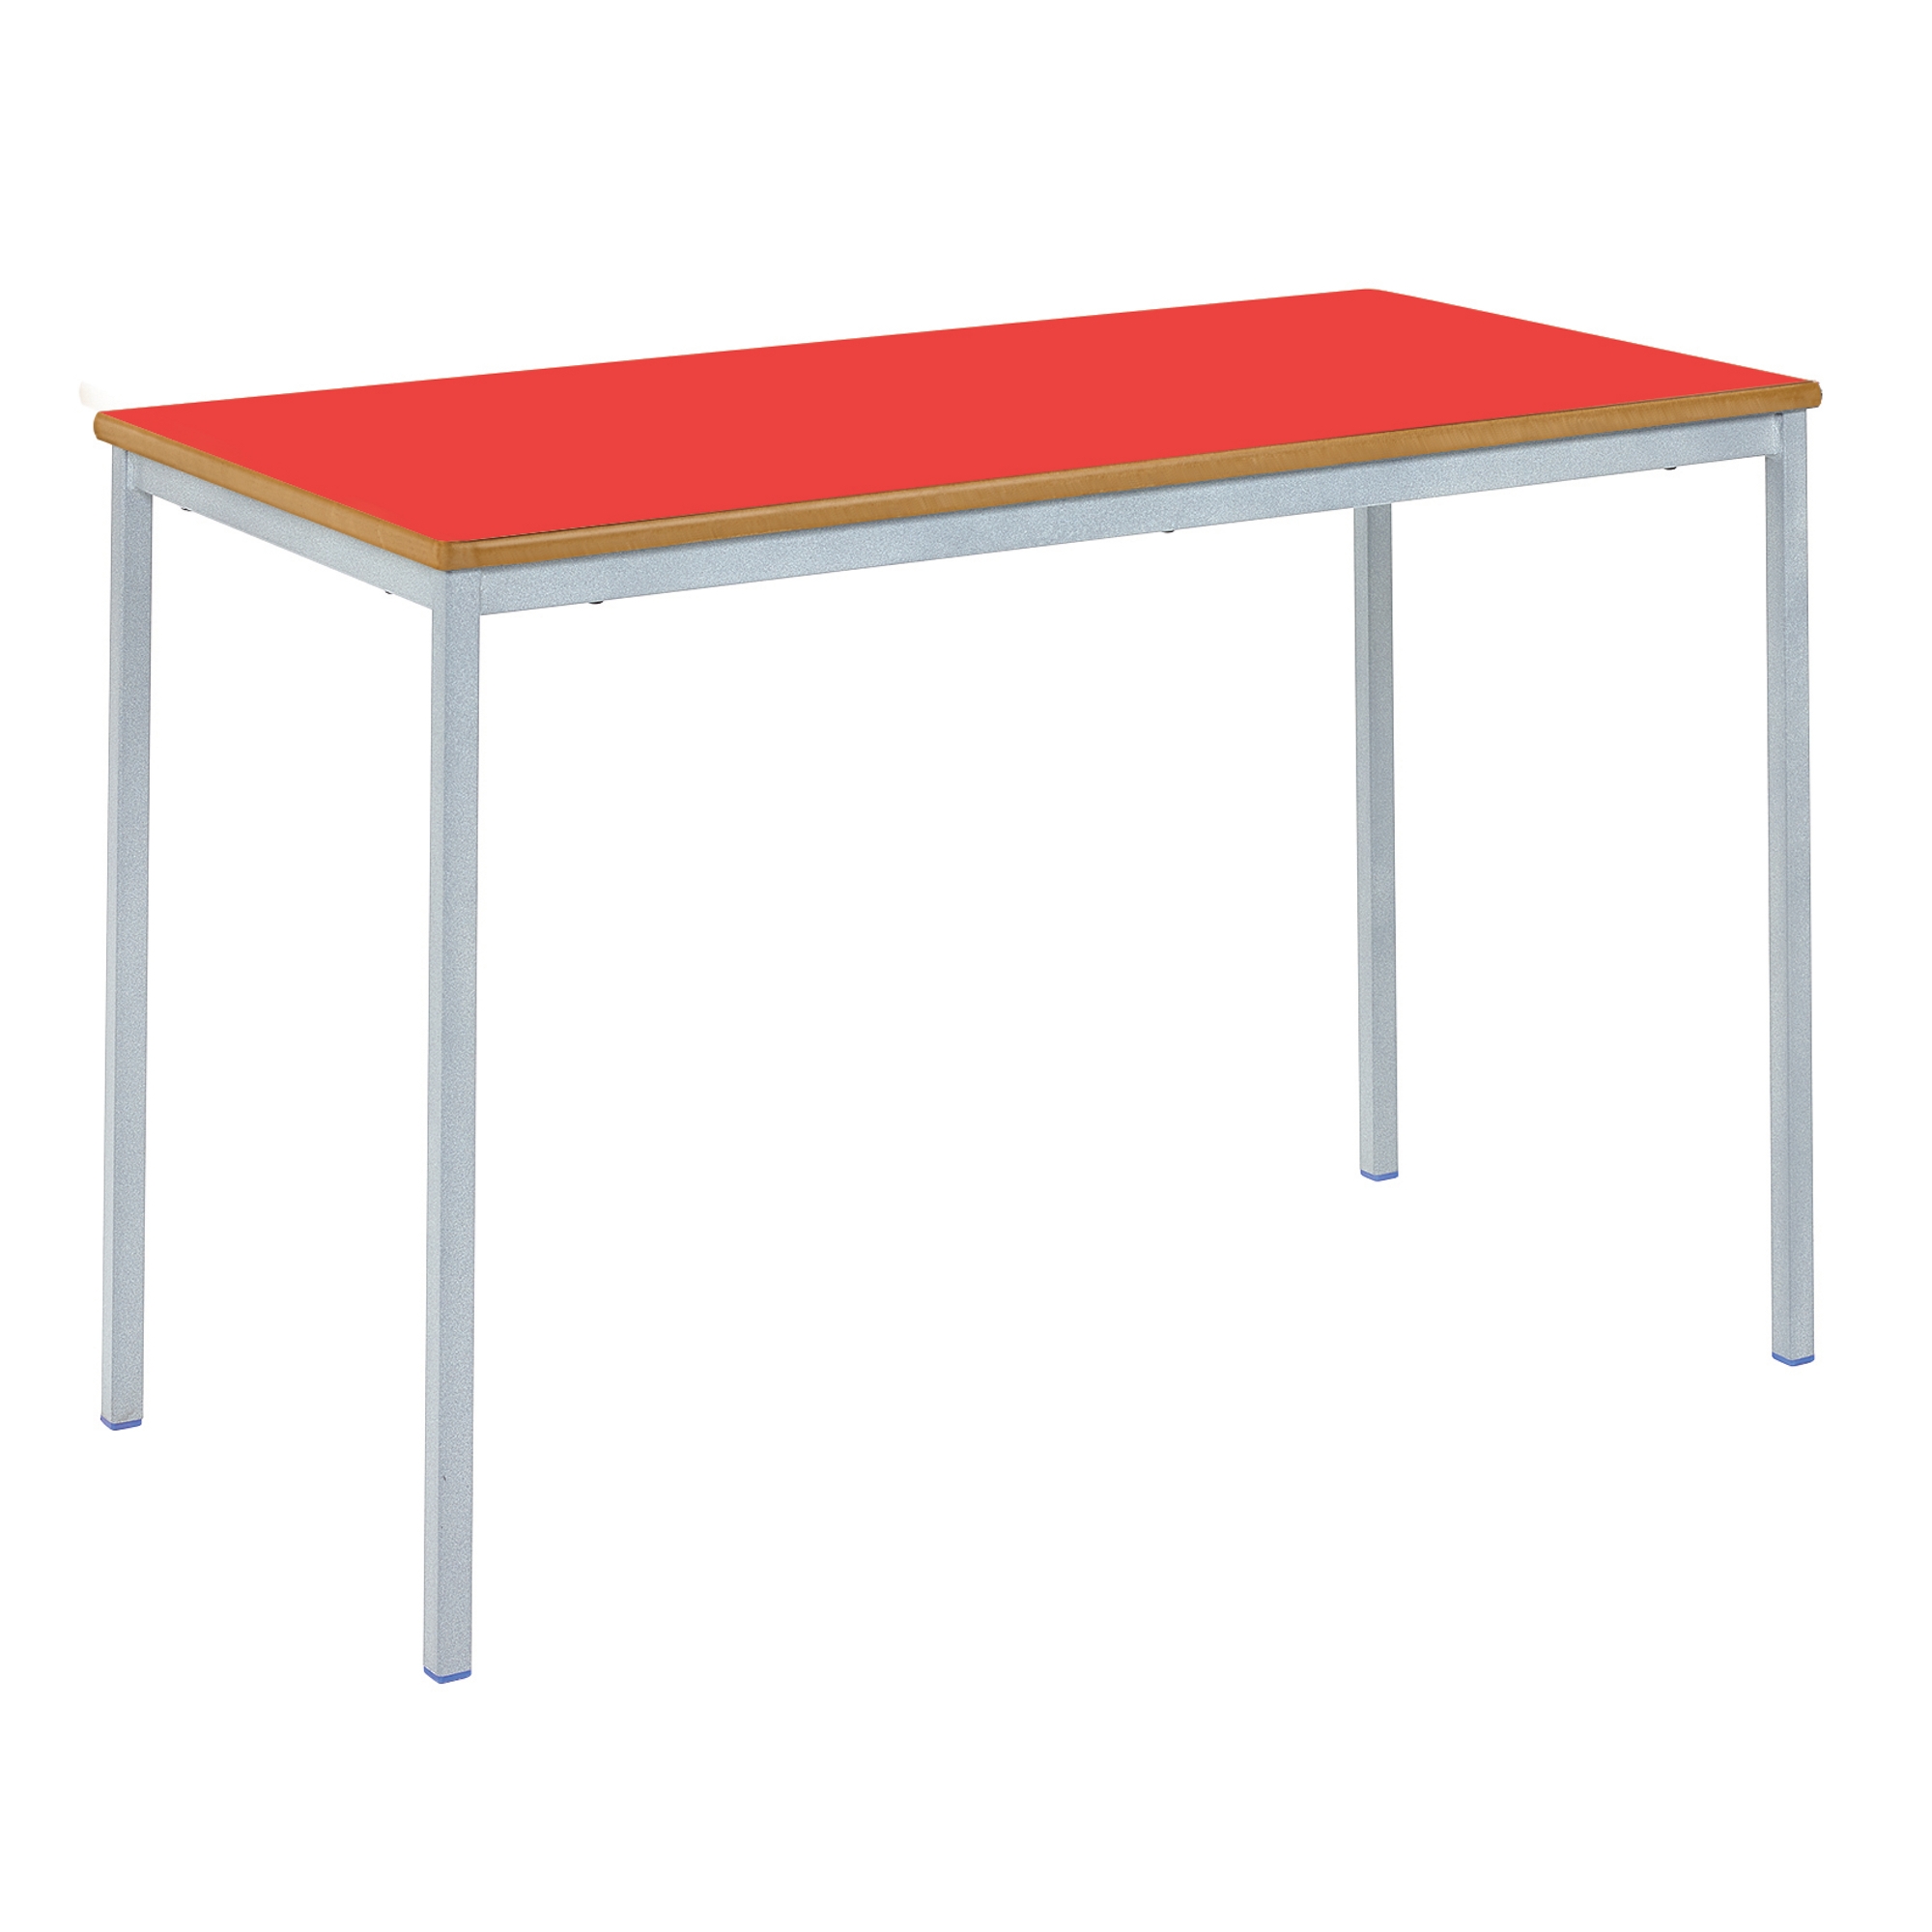 Classmates Rectangular Fully Welded Classroom Table - 1200 x 600 x 760mm - Red